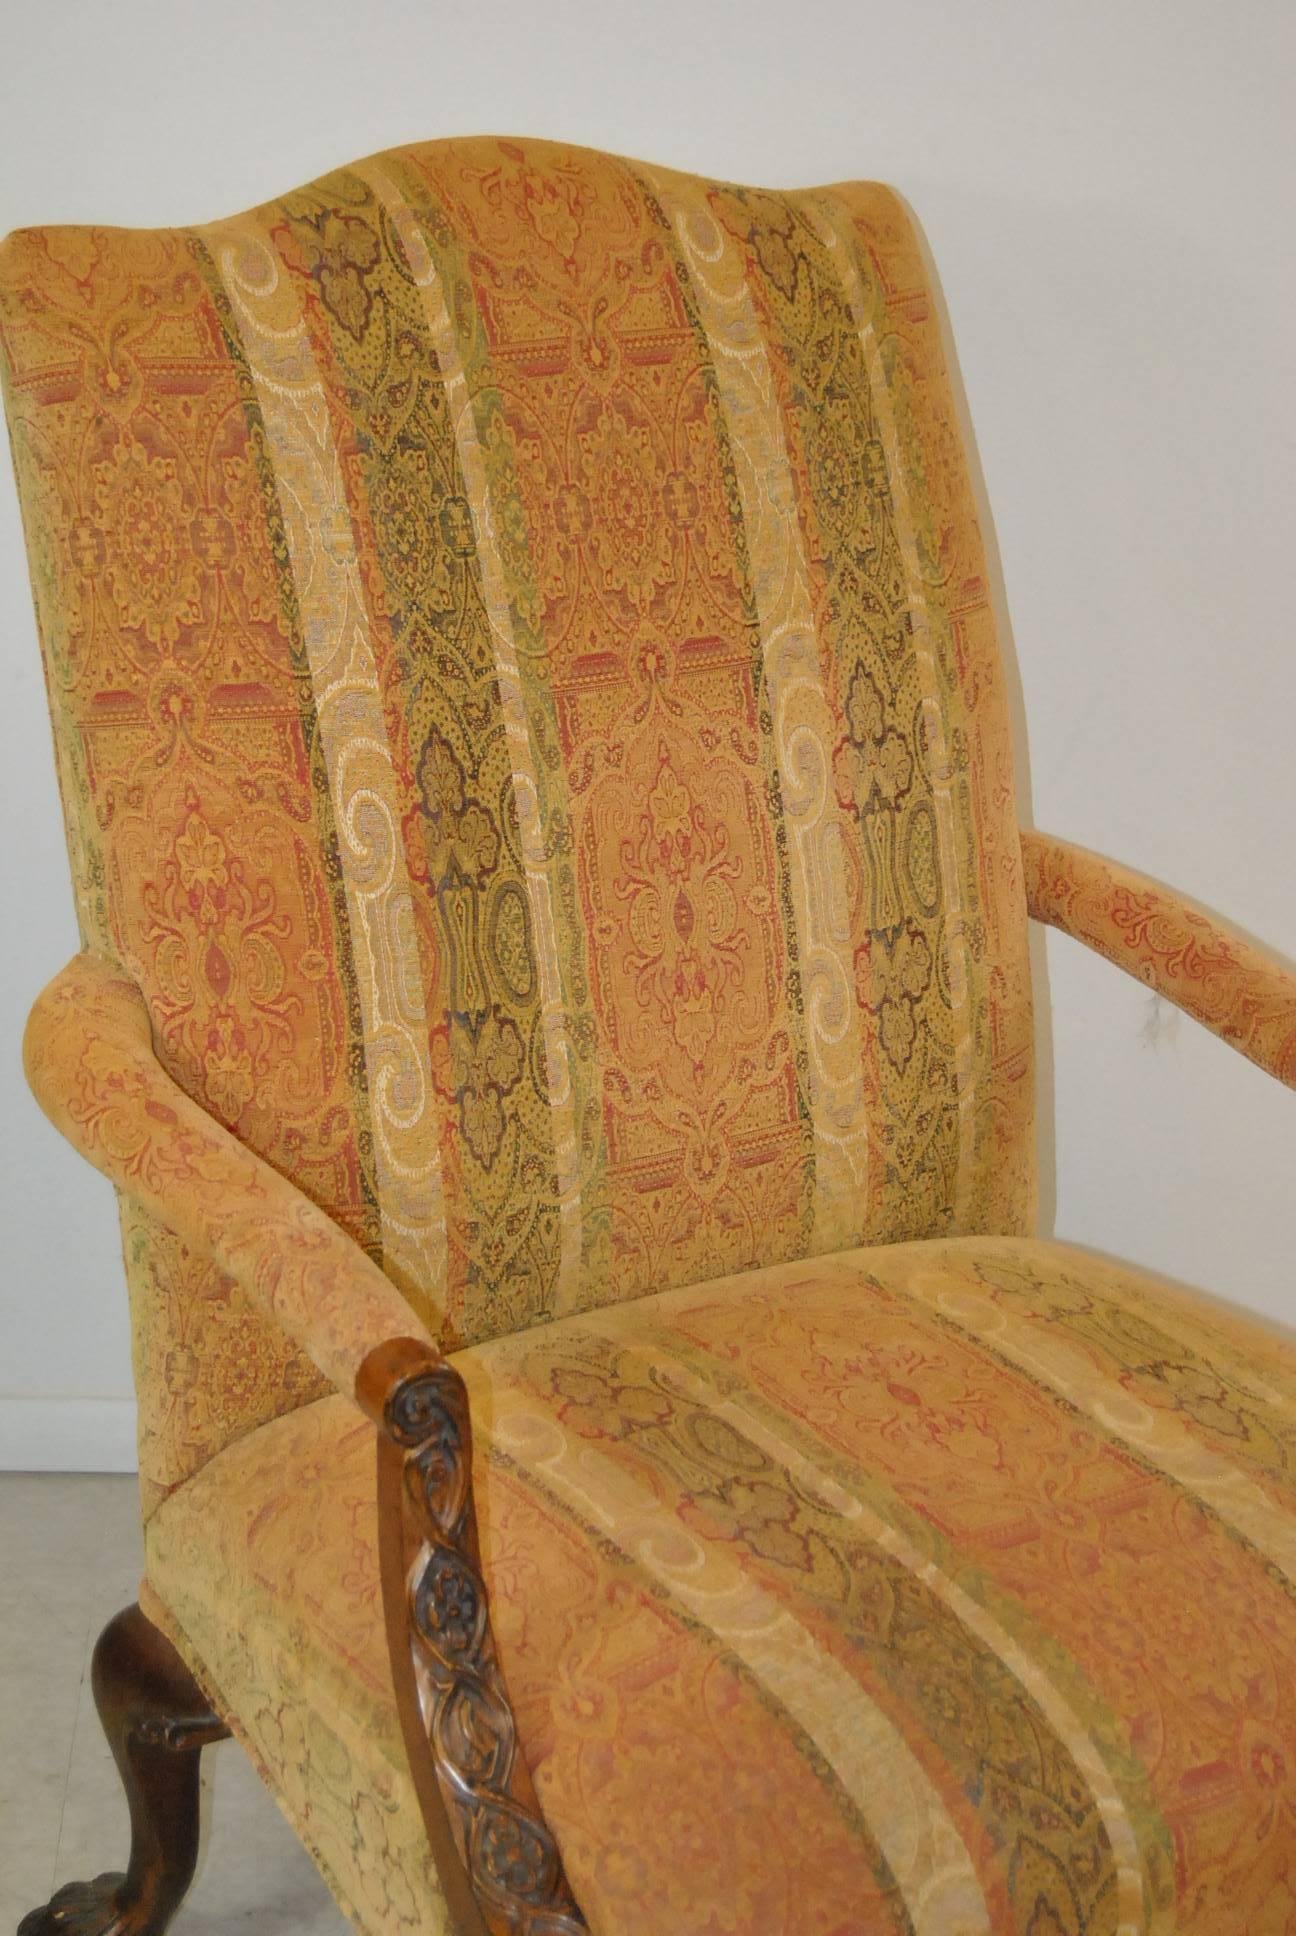 A beautiful mahogany Fauteuil armchair by Henredon. This is part of their Natchez collection. Features include carved detailing on arms and heavily carved claw feet. Chair is upholstered in a muted print with stripes in earth tones of green, tan and